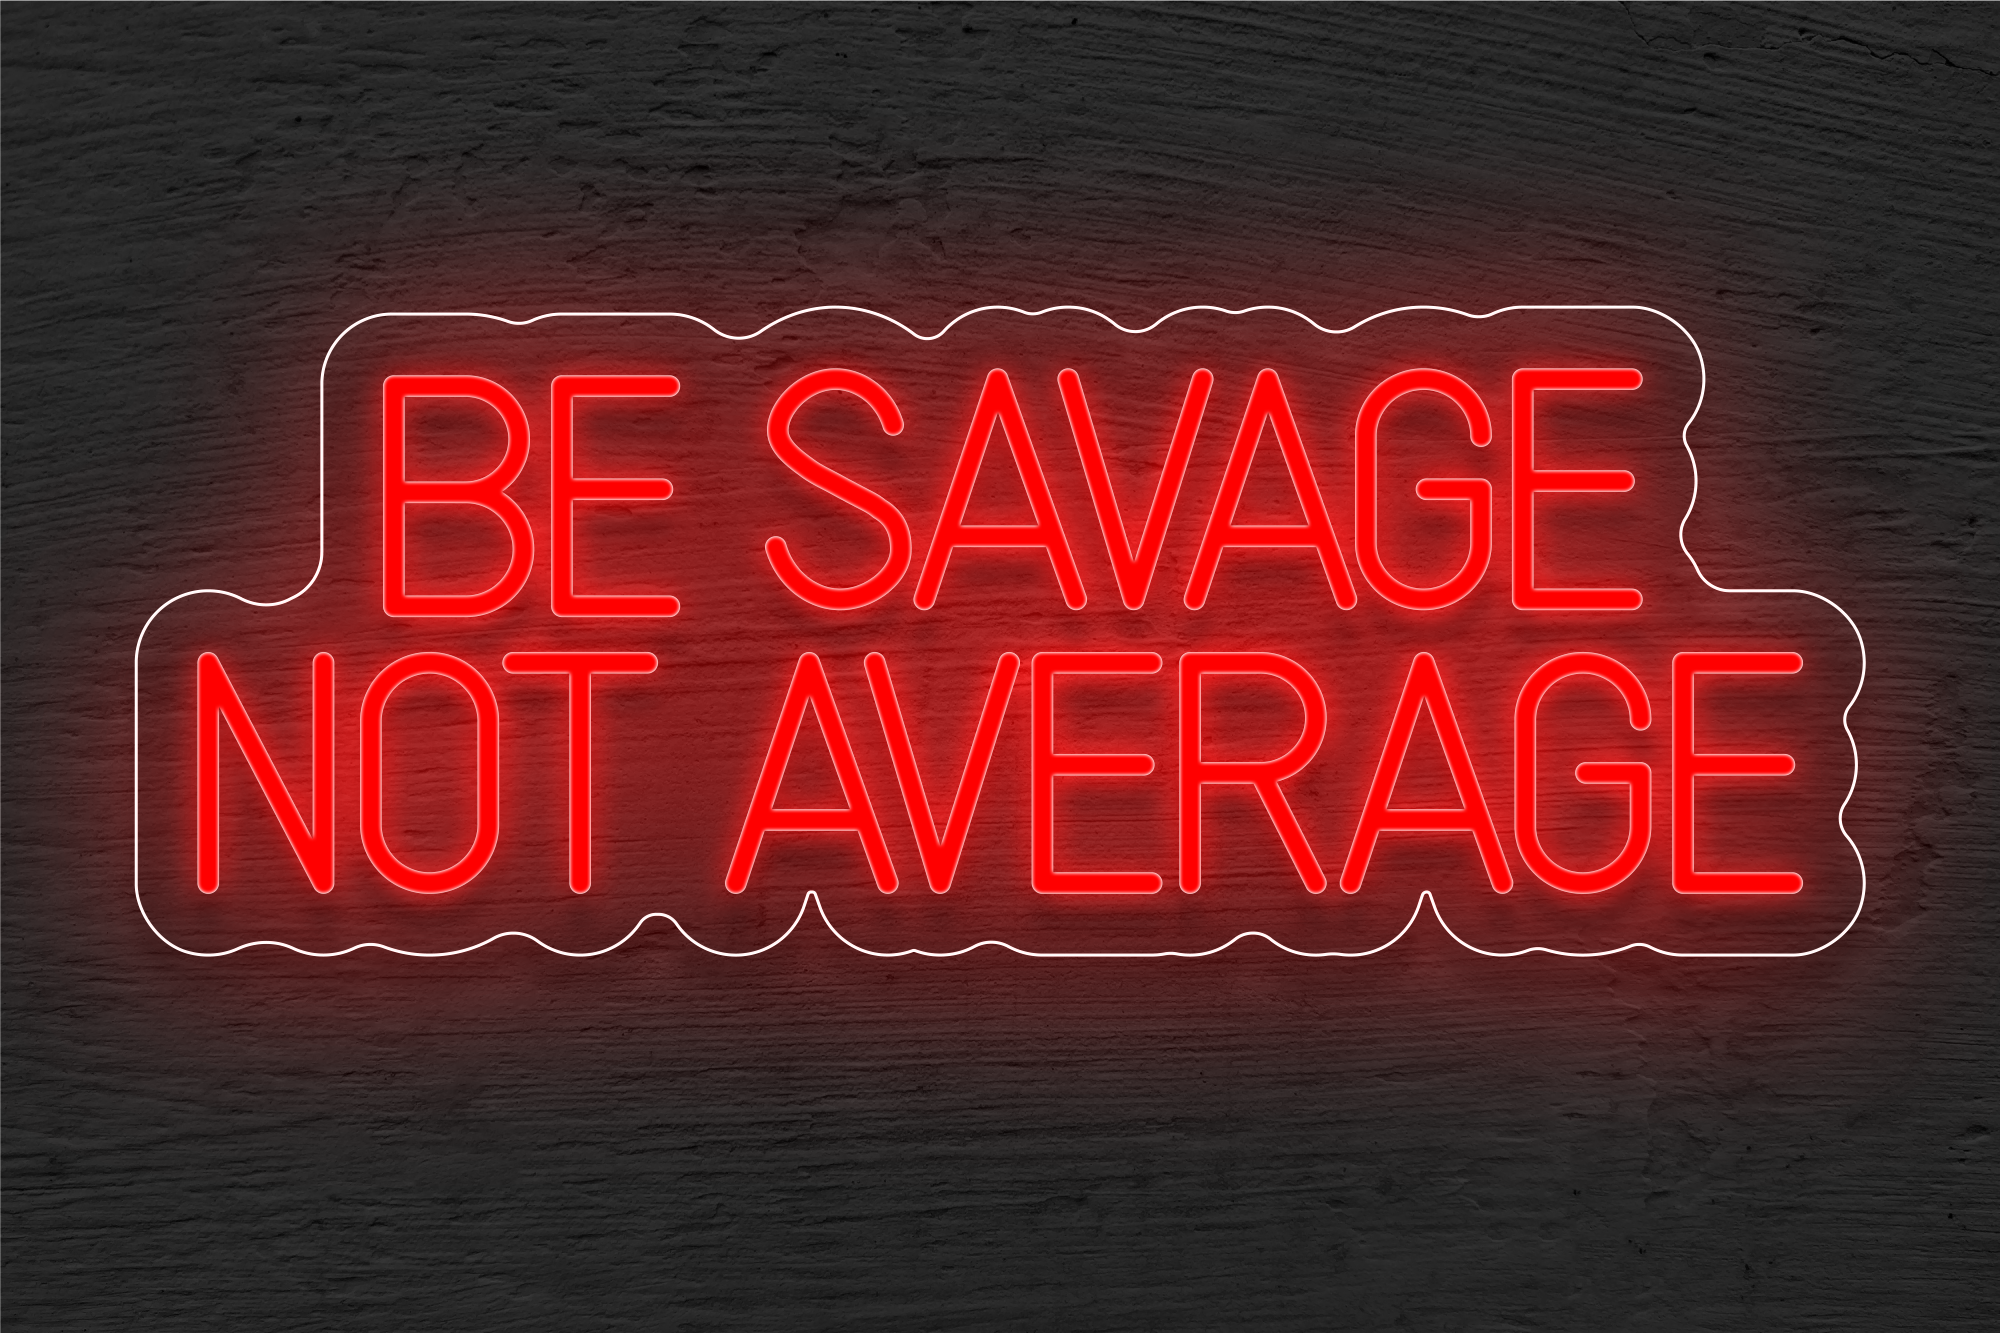 "Be Savage not Average" LED Neon Sign